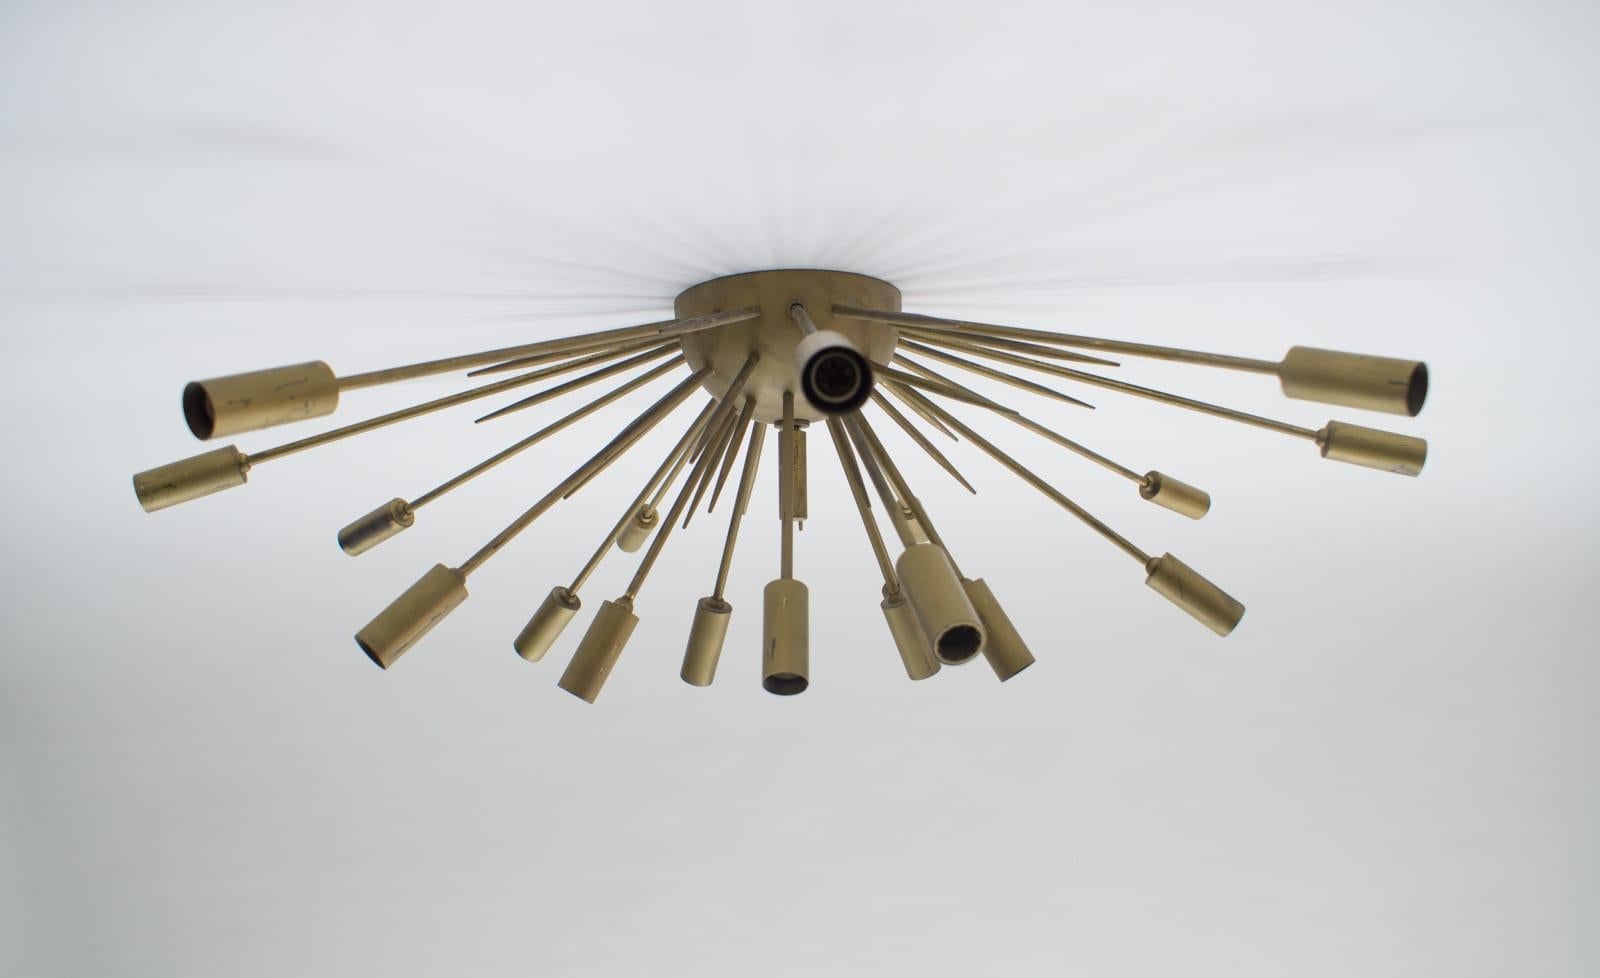 Italian Large Mid-Century Modern Brutalist Sputnik Wall or Ceiling Lamp, 1950s, Italy For Sale